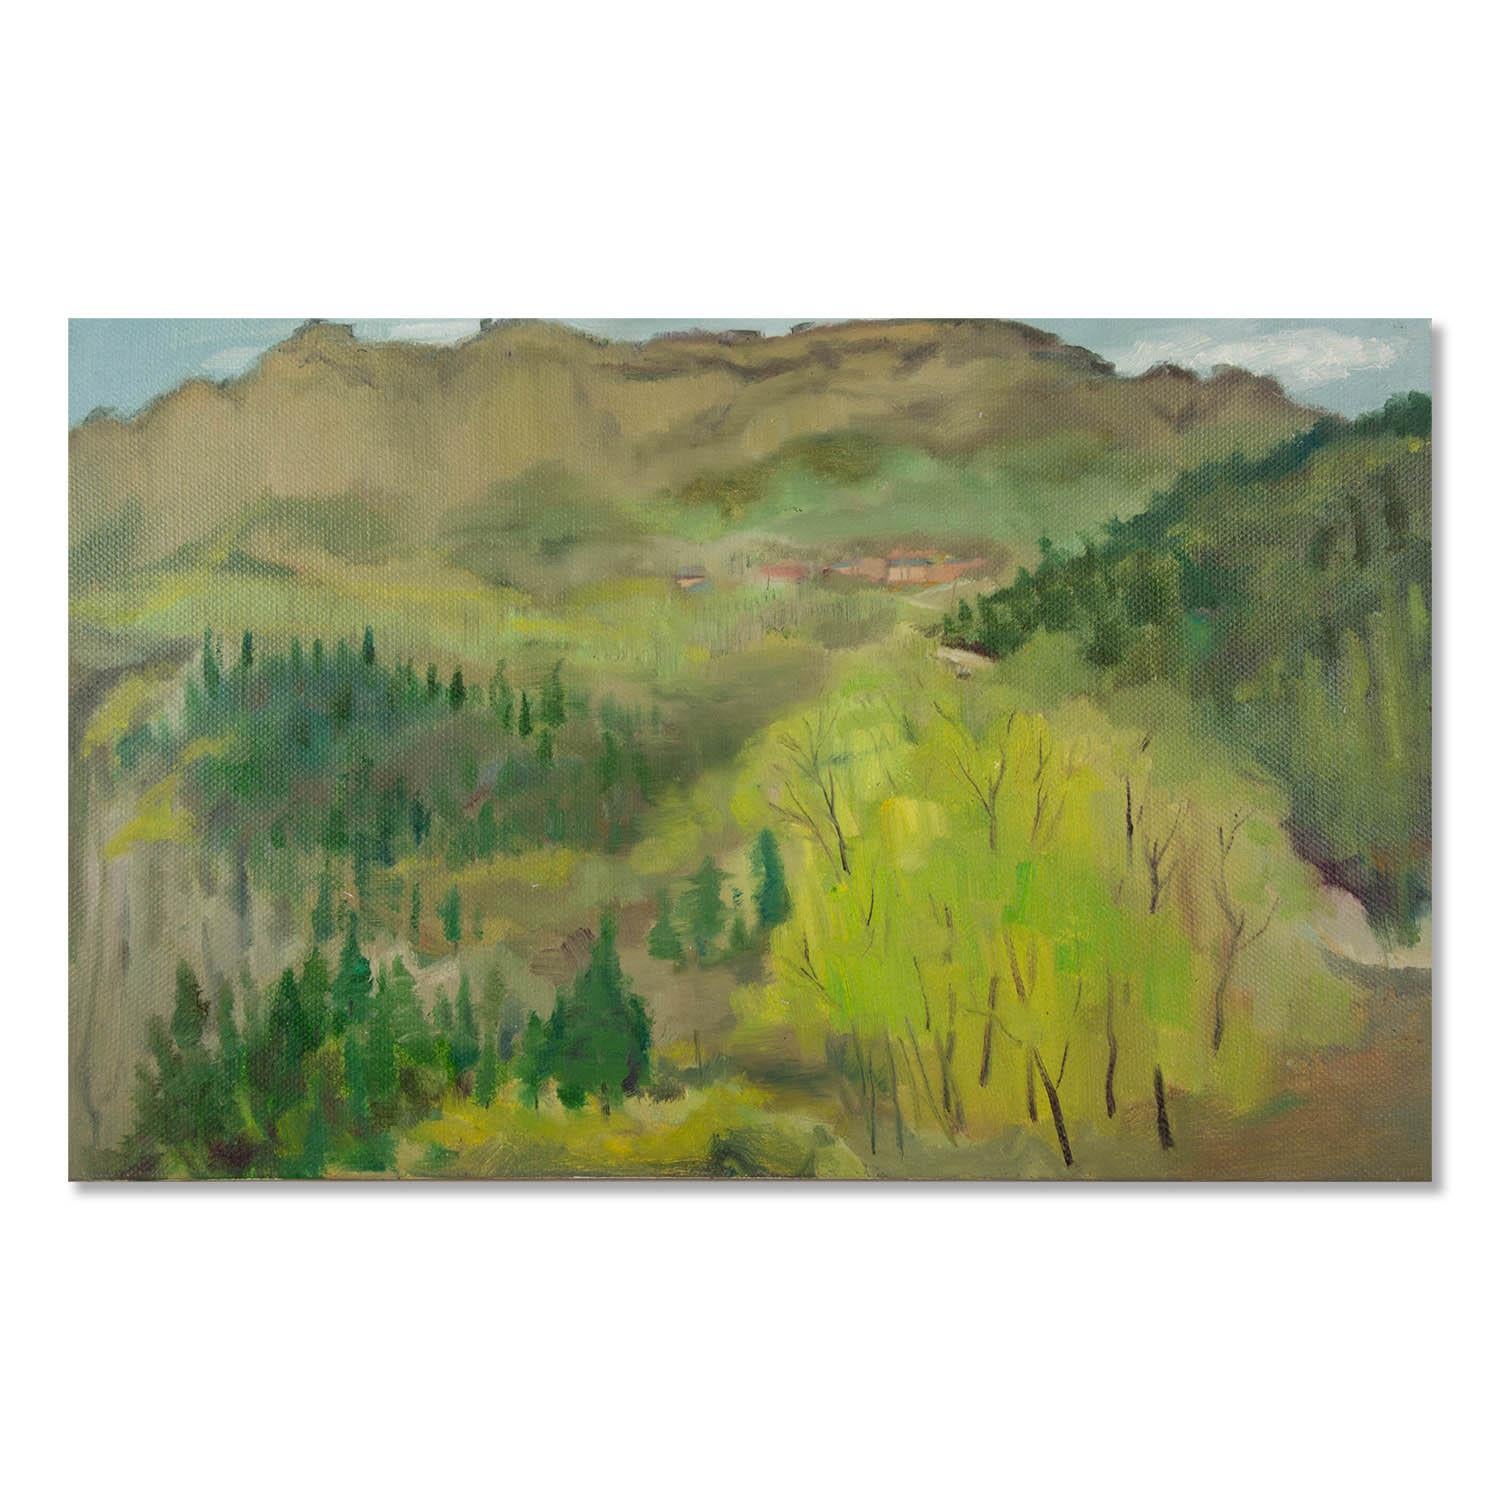  Title: The Spring Of TheTaihang Mountains
 Medium: Oil on canvas
 Size: 19 x 31 inches
 Frame: Framing options available!
 Condition: The painting appears to be in excellent condition.
 
 Year: 2000 Circa
 Artist: Xiang Niu
 Signature: Unsigned
